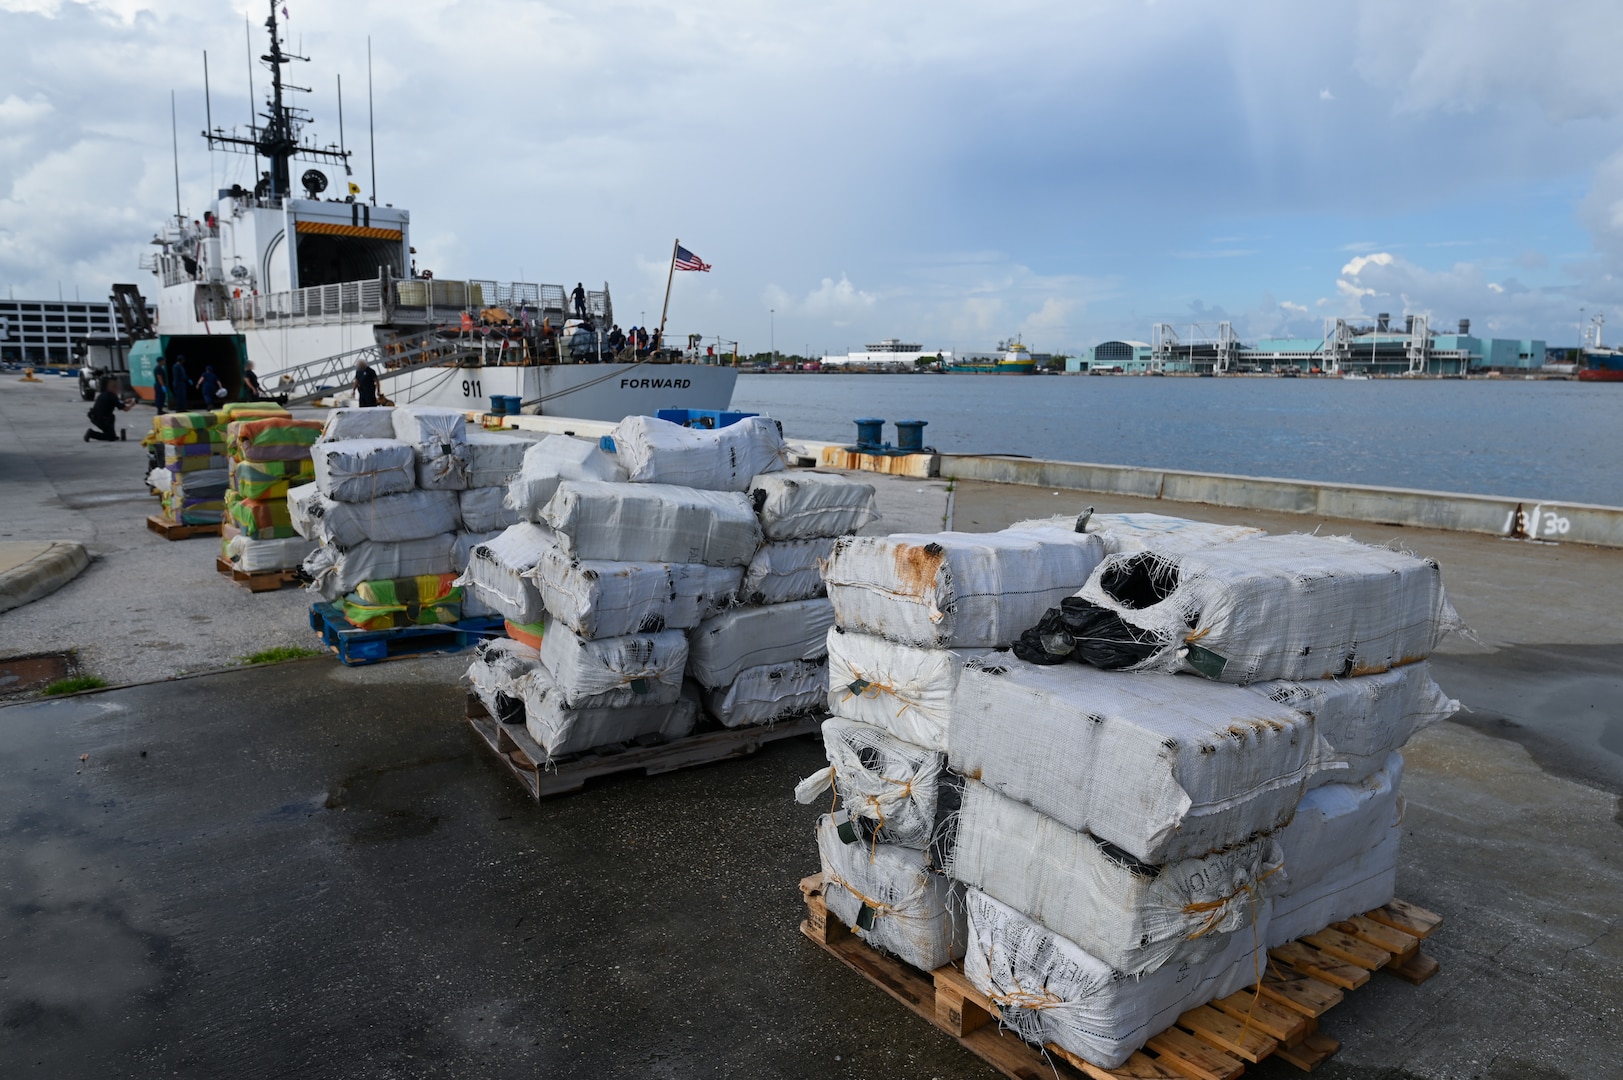 Crew members from Coast Guard Cutter Forward offload more than $96 million in illegal narcotics at Port Everglades, Florida, July 22, 2024. The offload is a result of three suspected drug smuggling interdictions in the international waters of the Caribbean Sea. (U.S. Coast Guard photo by Petty Officer 3rd Class Nicholas Strasburg)